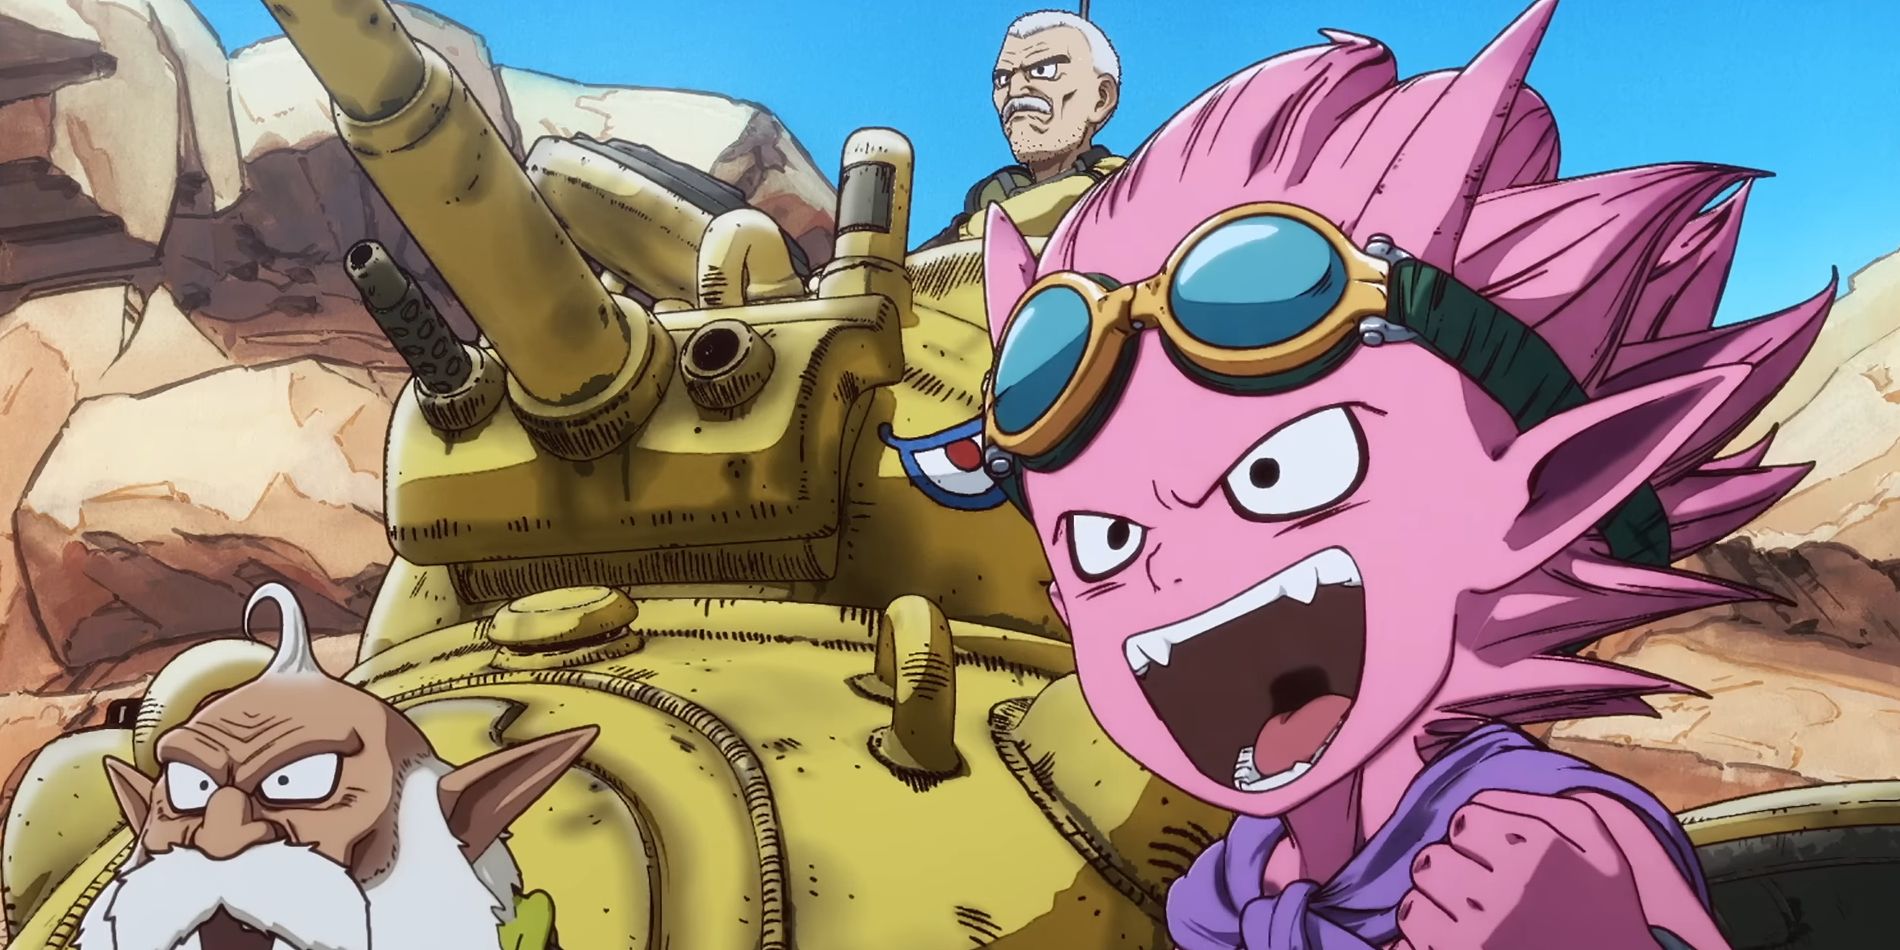 Screenshot from Sand Land Anime shows Beelzebub and Thief looking happy while Rao sits in a Tank behind them.